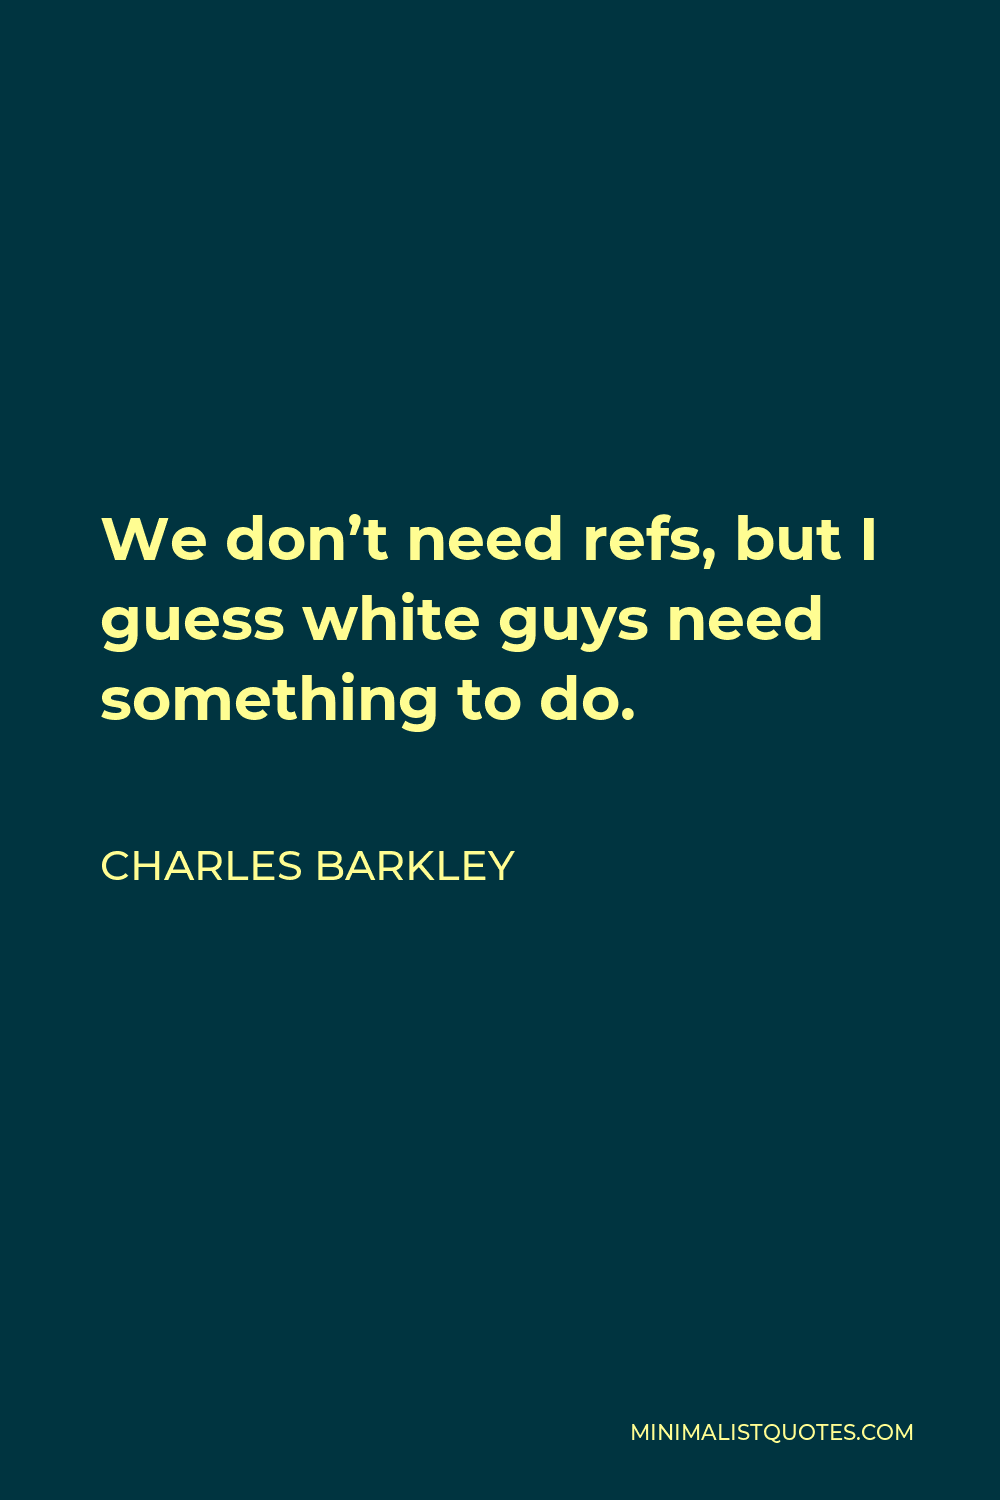 Charles Barkley Quote - We don’t need refs, but I guess white guys need something to do.